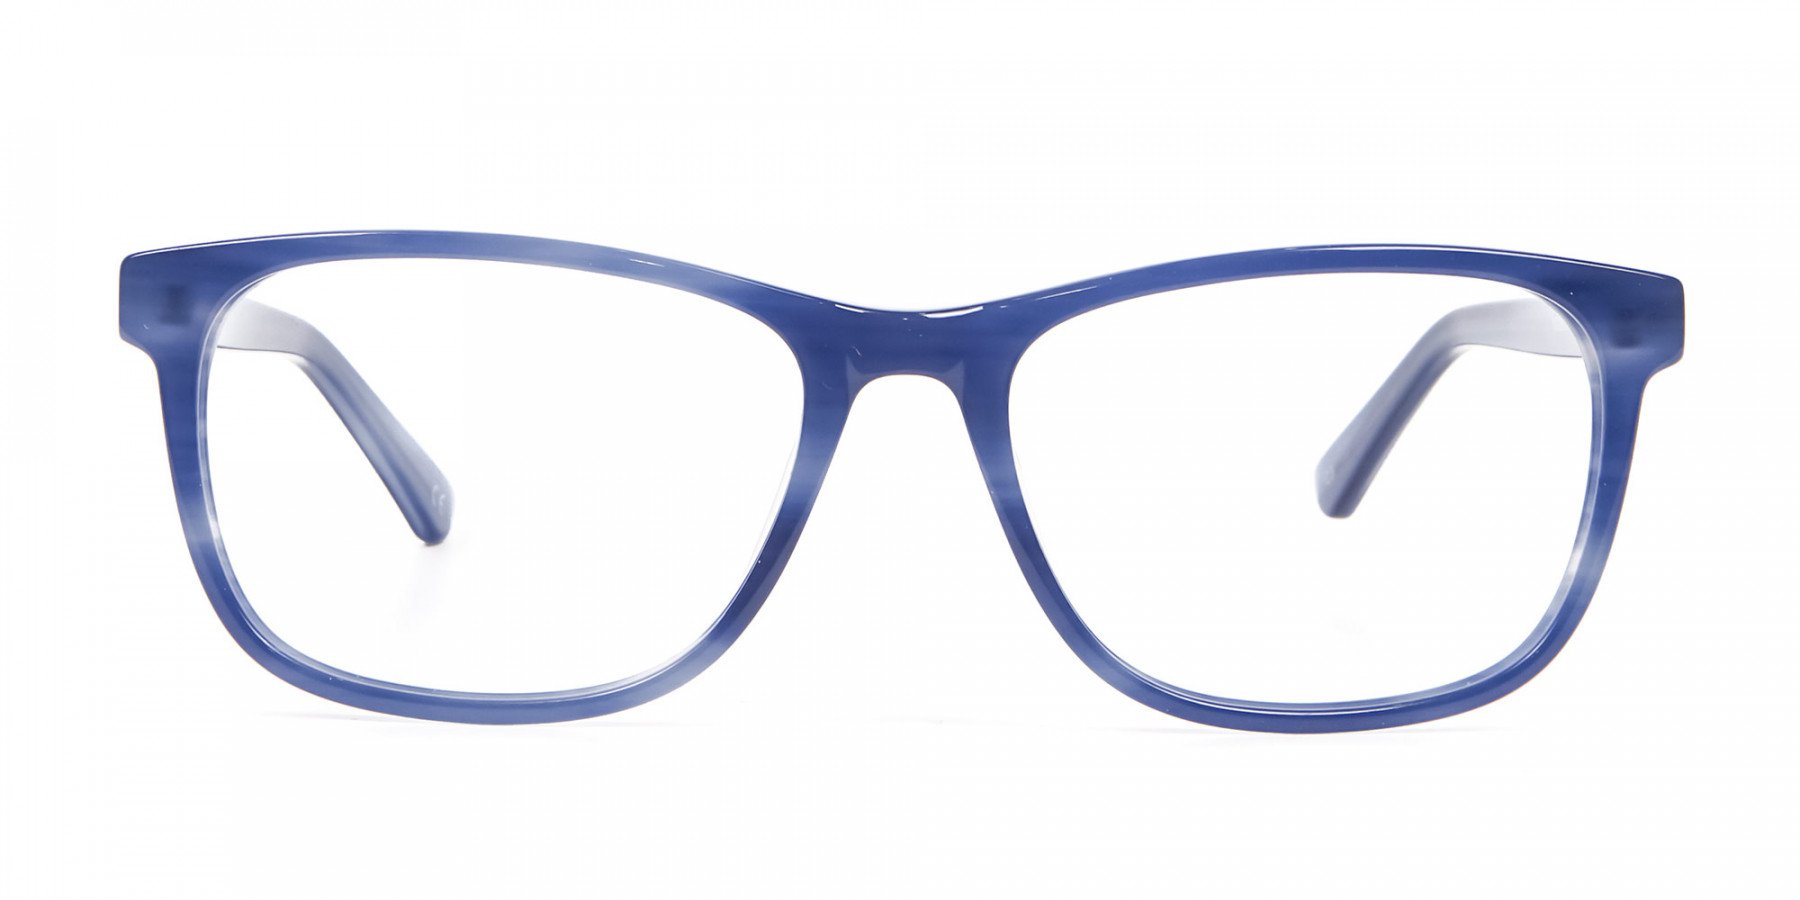 Glossy Blue Frame from In Trend Collection